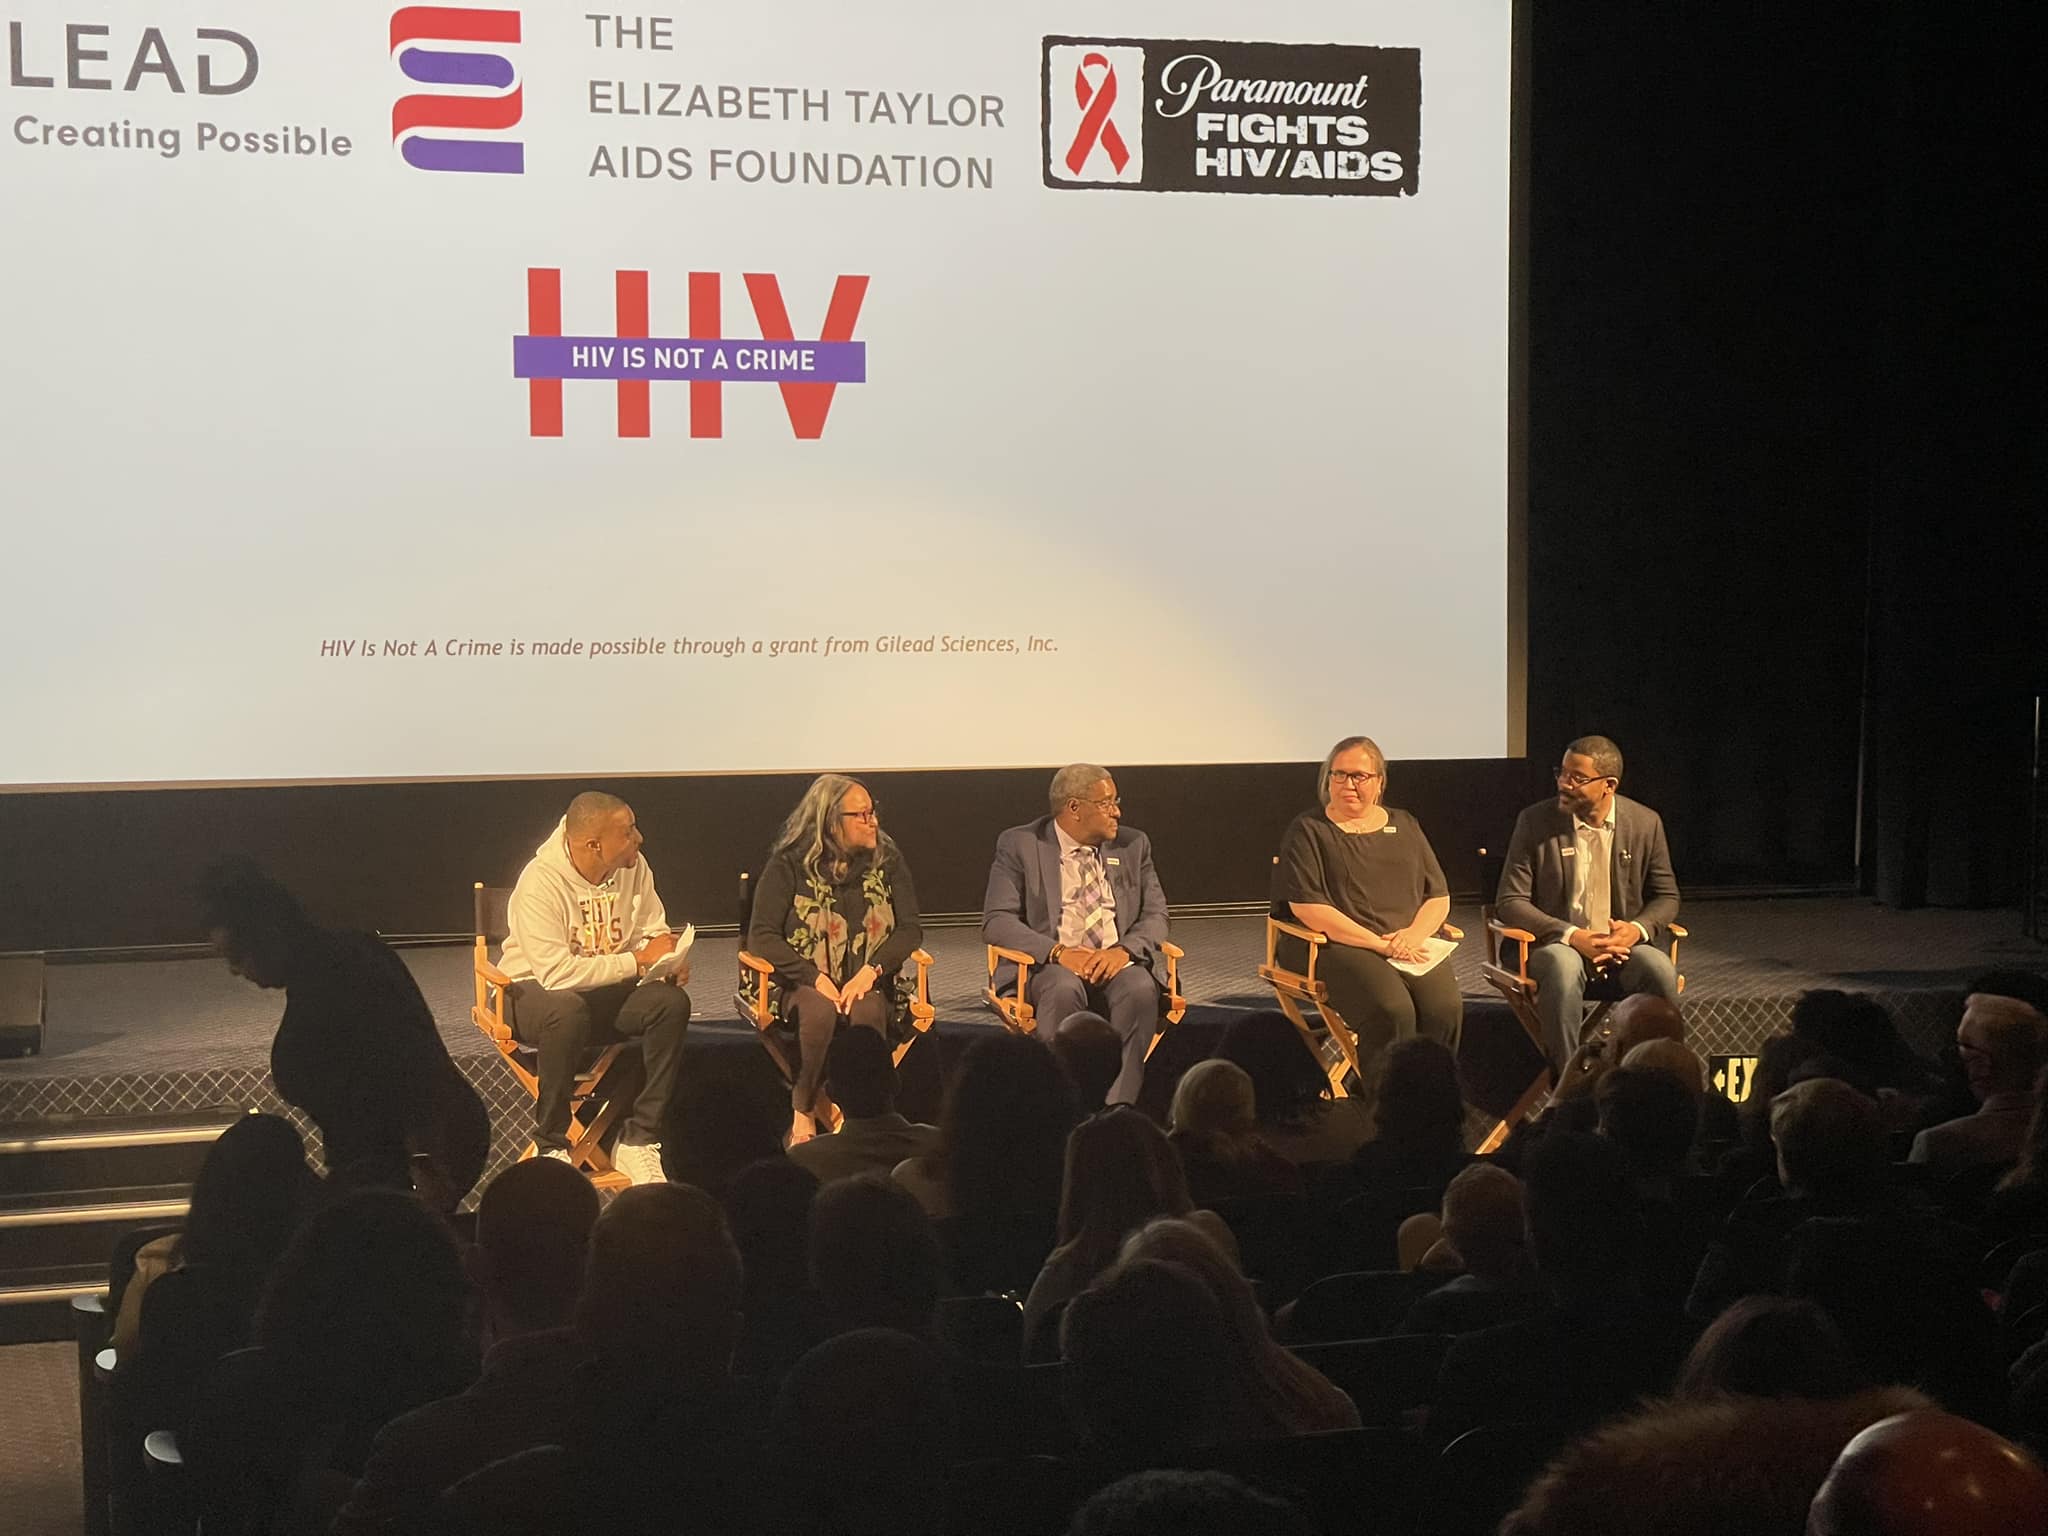 HIV is Not a Crime holds event at Paramount